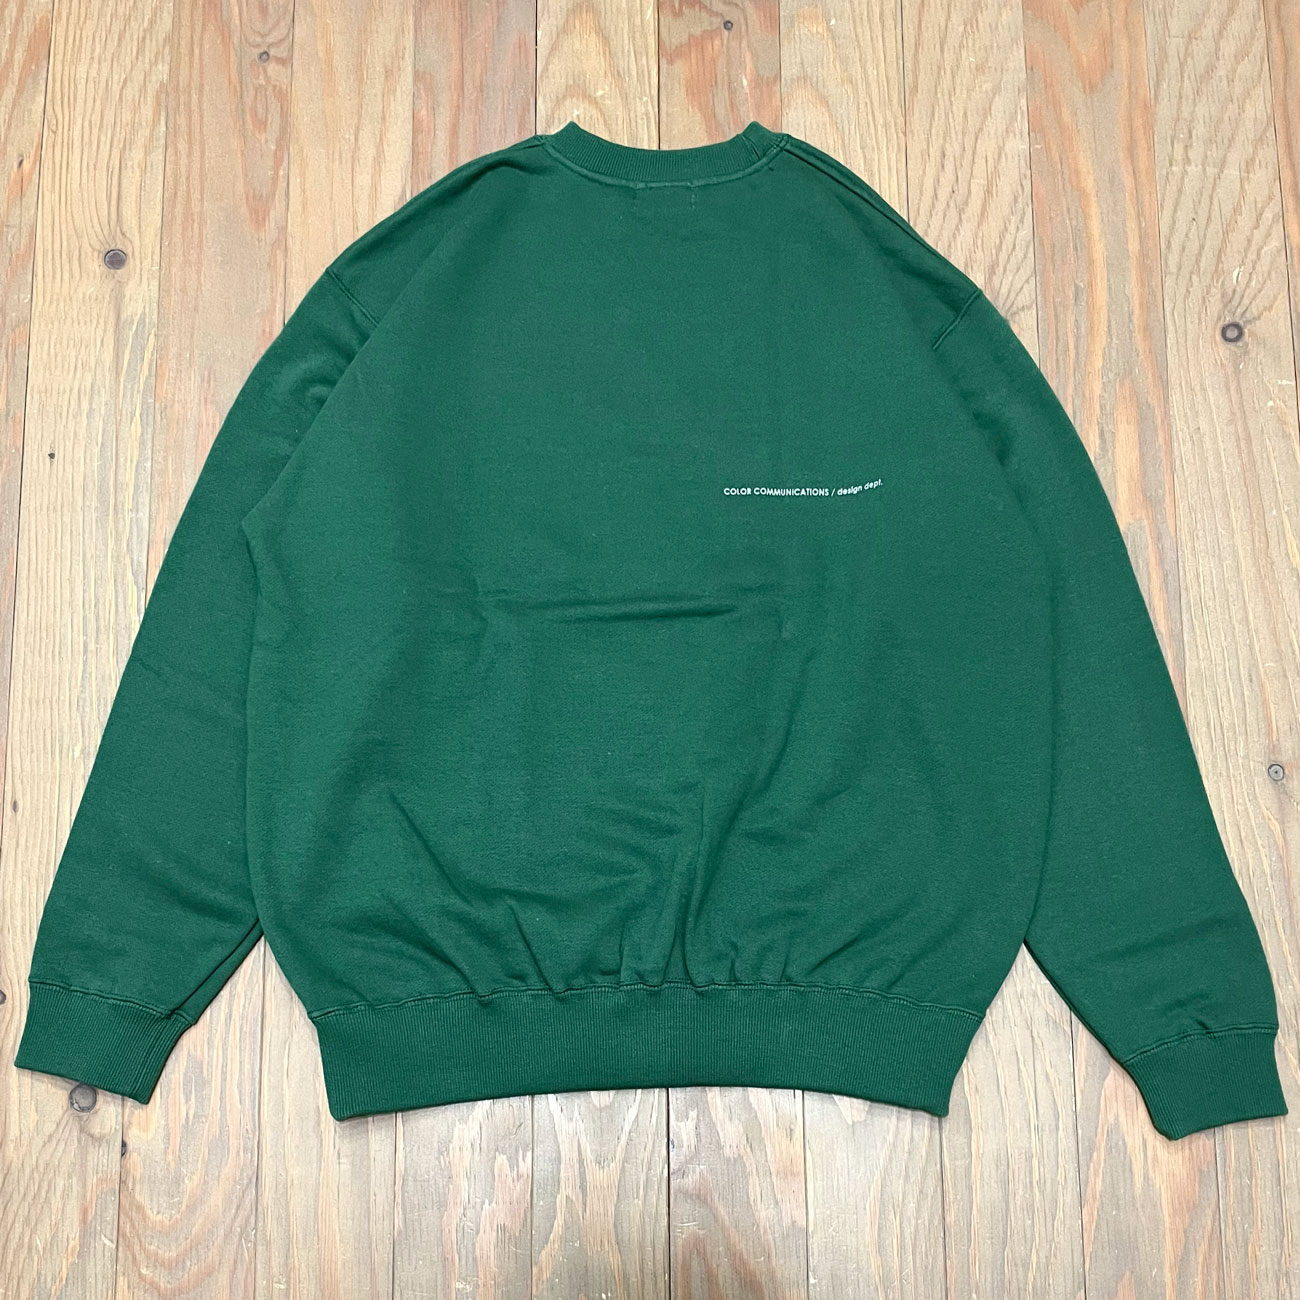 COLOR COMMUNICATIONS DRIP EMB LETTER CREW SWEAT